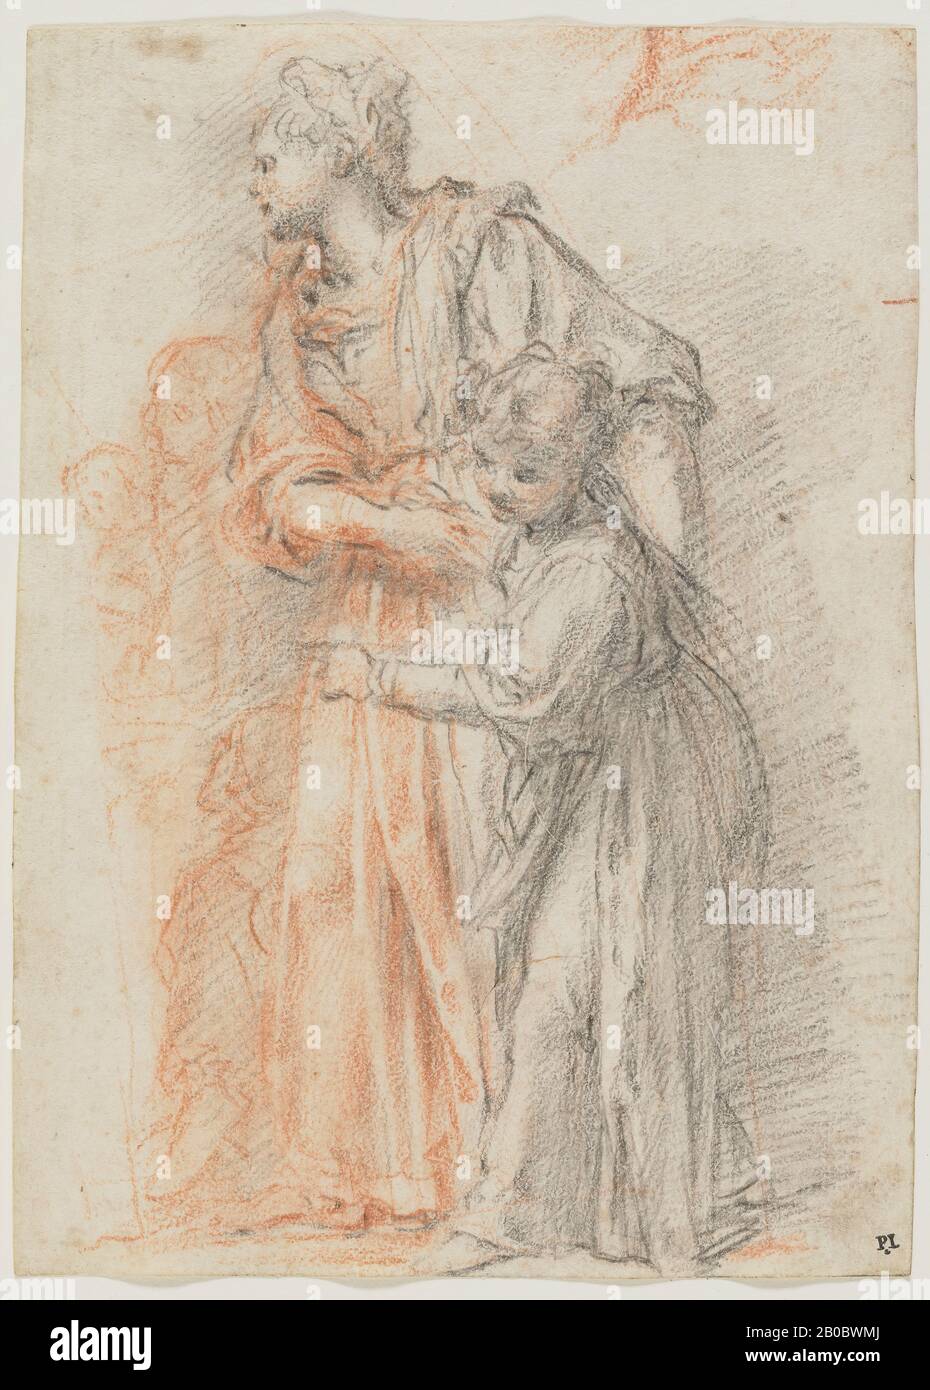 Bernadino Poccetti, Woman and Child, 1604-1606, black and red chalk on paper, 8 7/8 in. x 6 3/8 in. (22.5 cm. x 16.2 cm.), As a final preparatory study for a figurative group in a lunette fresco, this drawing resolved a compositional challenge. As the lightly drawn arc above the woman's left shoulder indicates, the figures were to be placed in the extreme right of the fresco, directing the viewer's attention to and framing the historical narrative unfolding in the center. The existing fresco, one of fourteen by Poccetti for the Chiostri dei Morti (Cloister of the Dead) of Santissima Annunziata Stock Photo